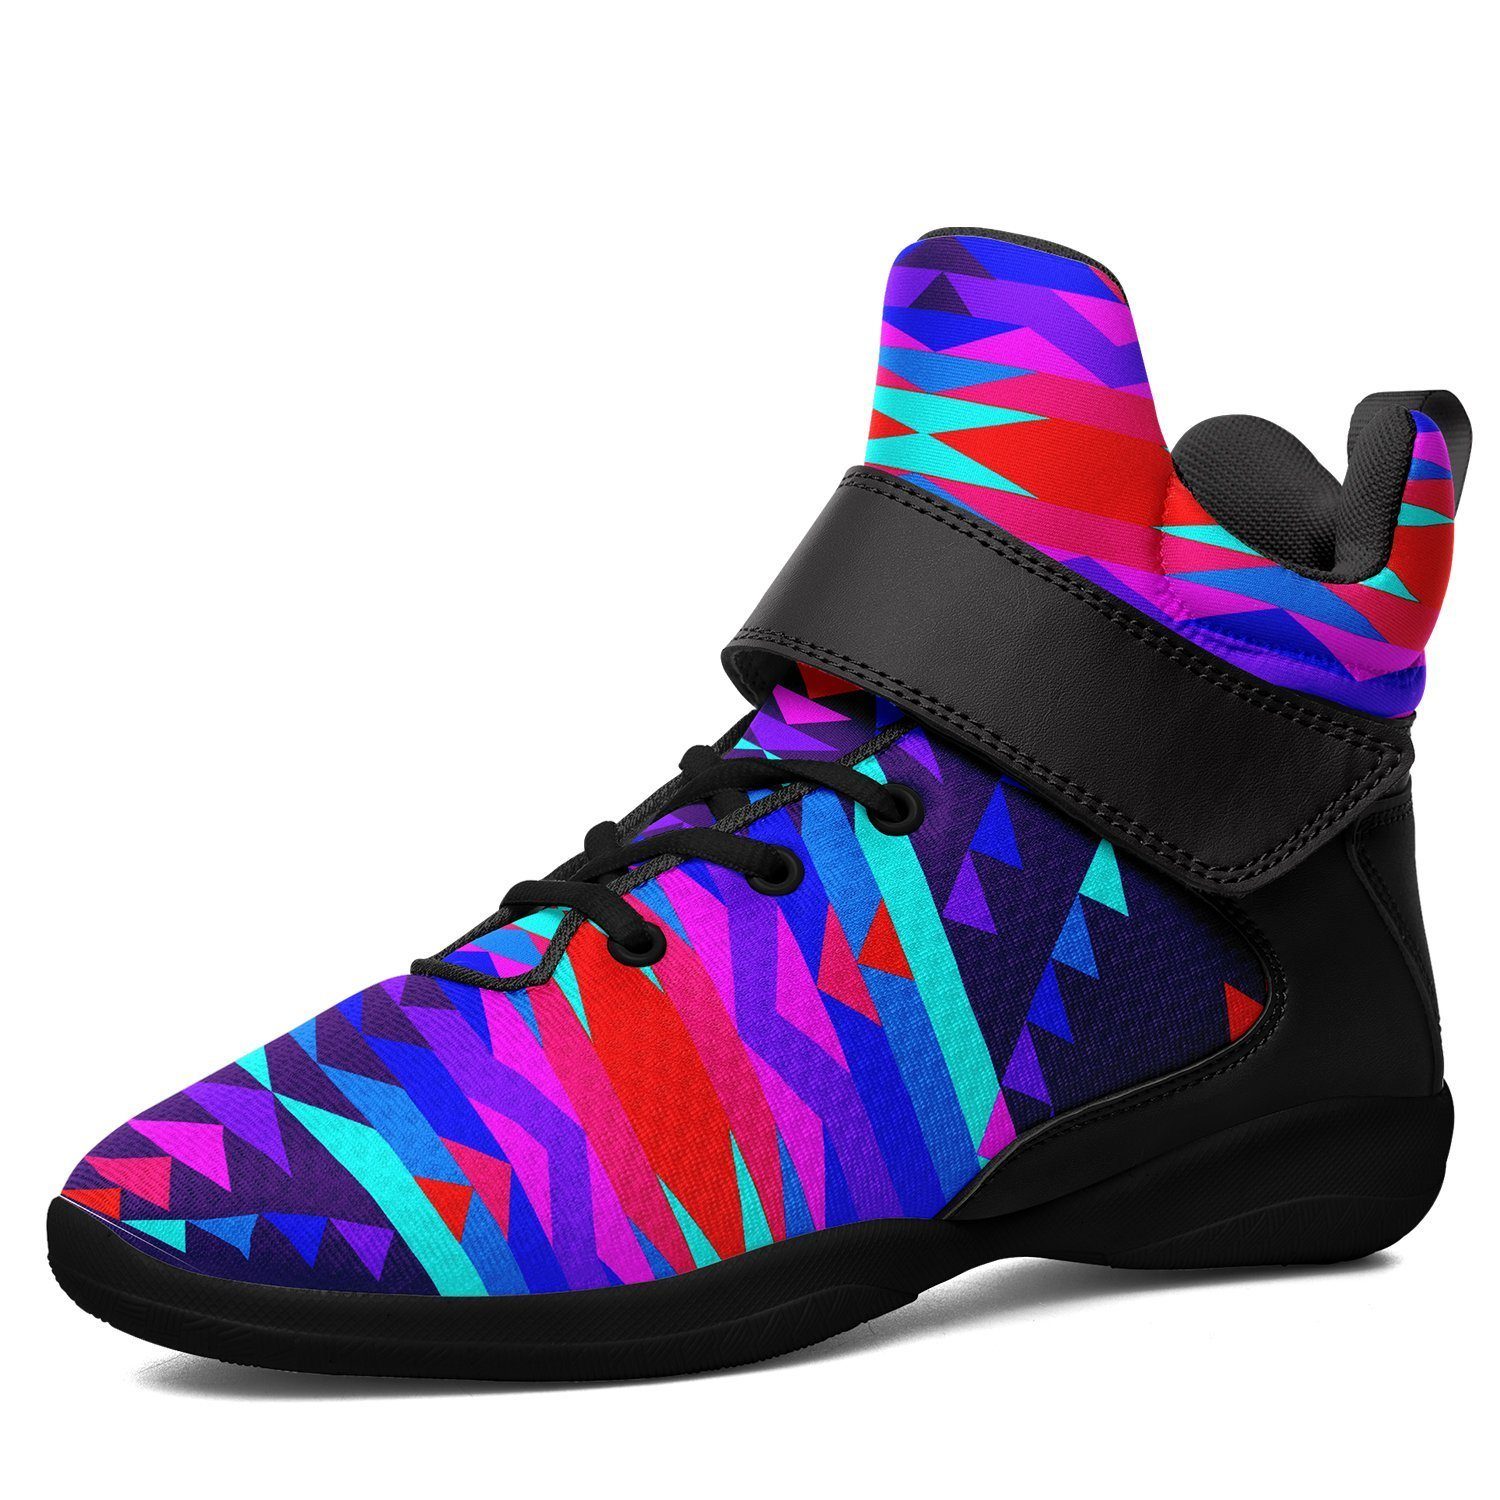 Visions of Peace Ipottaa Basketball / Sport High Top Shoes - Black Sole 49 Dzine US Men 7 / EUR 40 Black Sole with Black Strap 